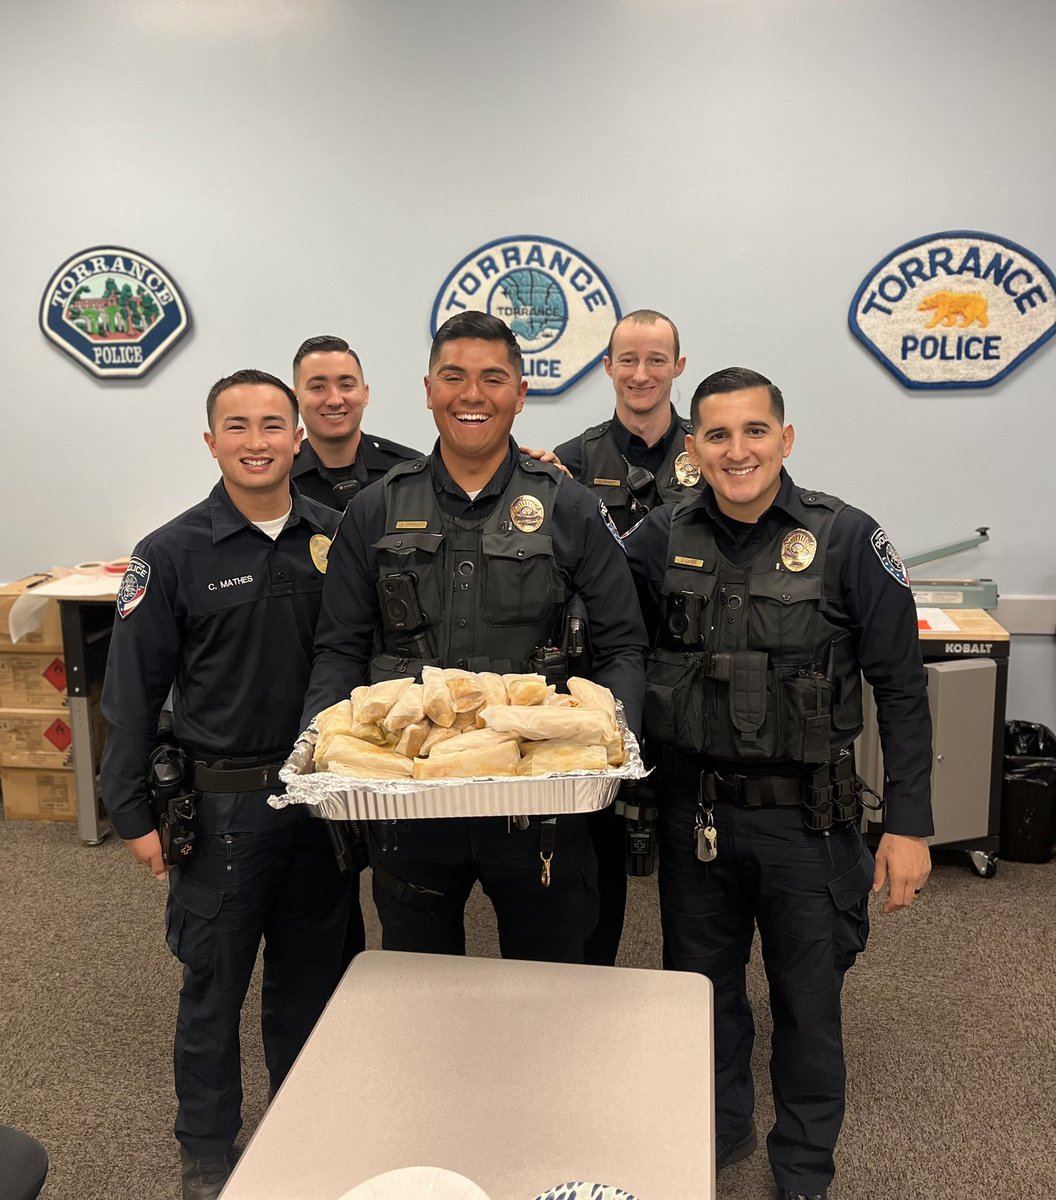 It ain’t a Christmas without tamales. 🫔 Thanks to Officer Castillo for bringing them in! 🎄🚔 #TamaleSeason #MerryChristmasEve #TorranceCA